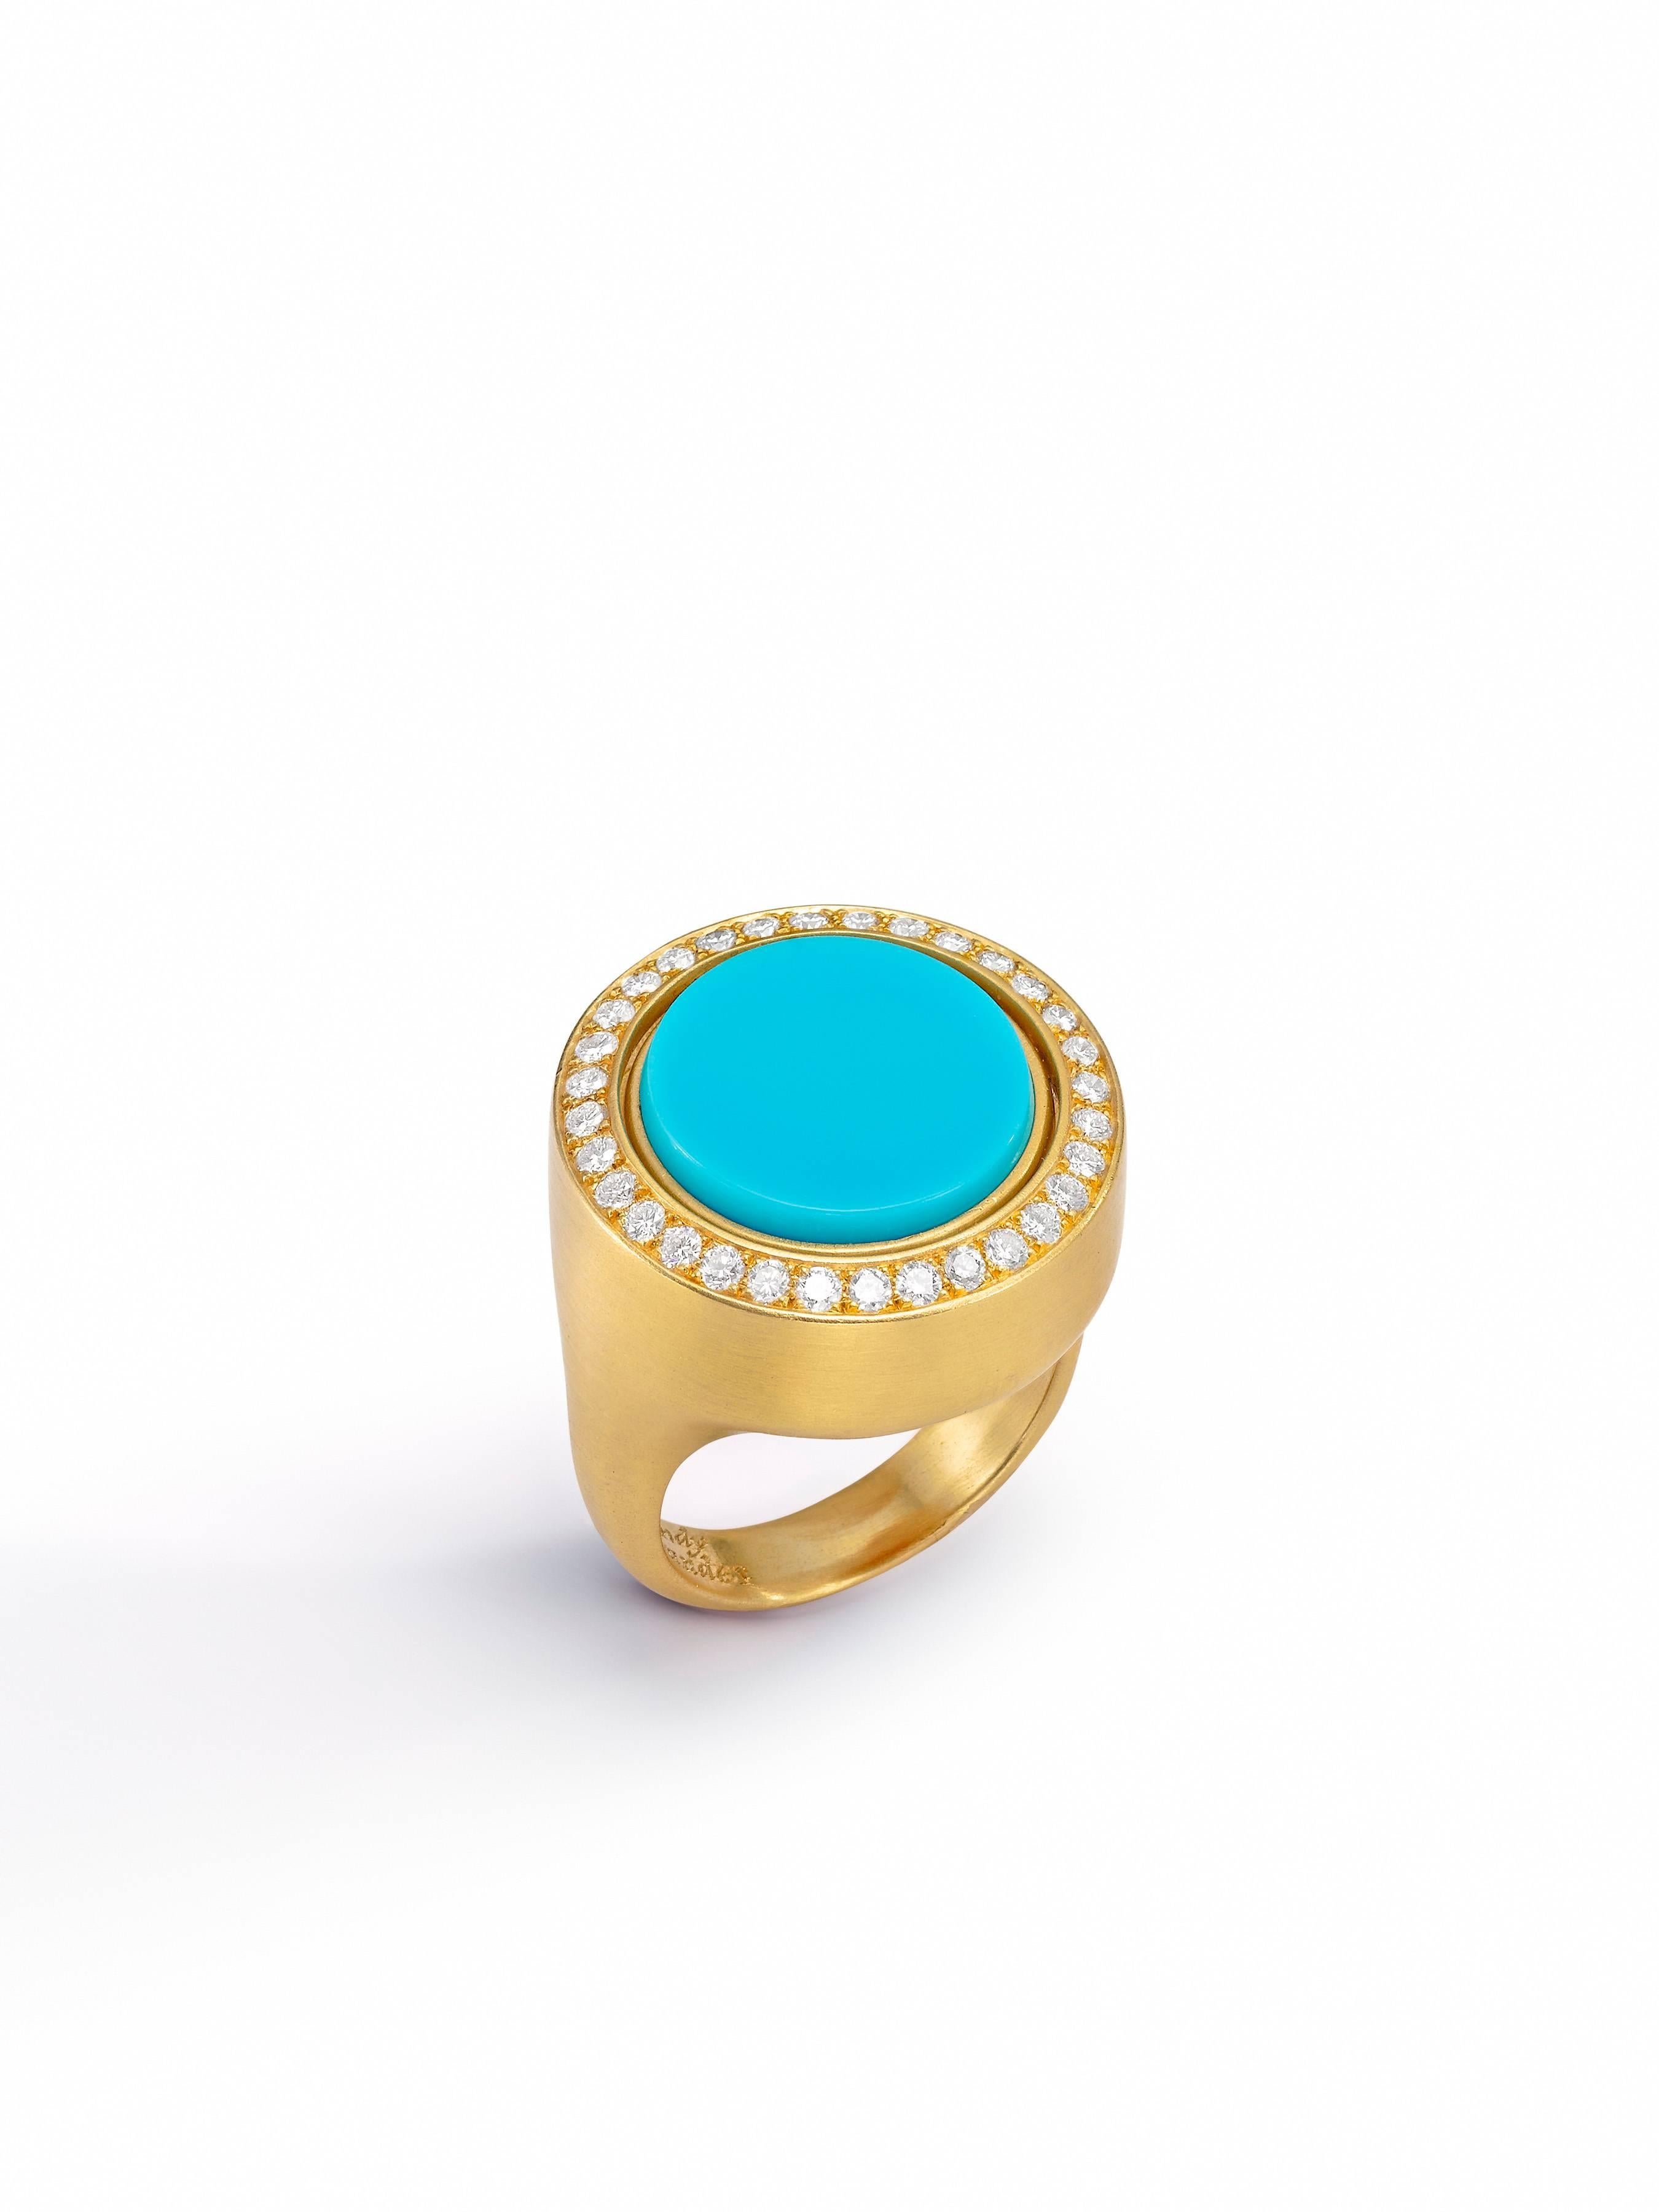 Contemporary Wendy Brandes 2-in-1 Turquoise and Carnelian 18K Gold Swivel Ring & Earring Set